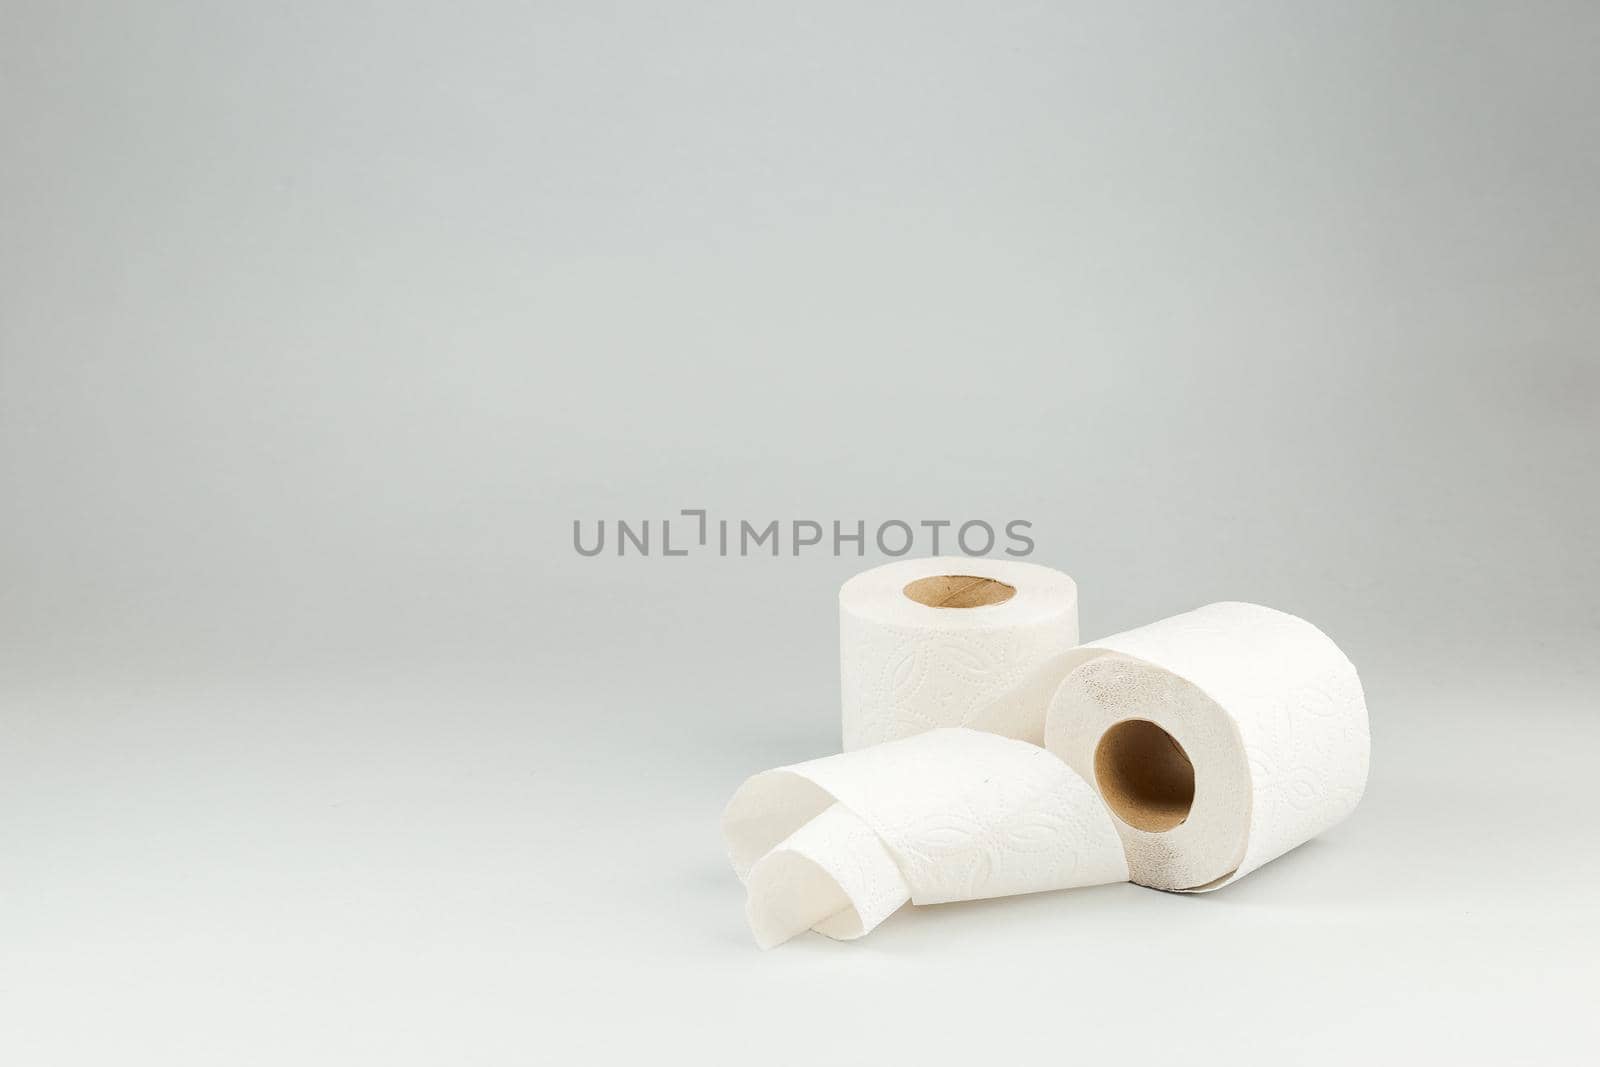 Two Rolls of Toilet Paper over Gray Background by Syvanych